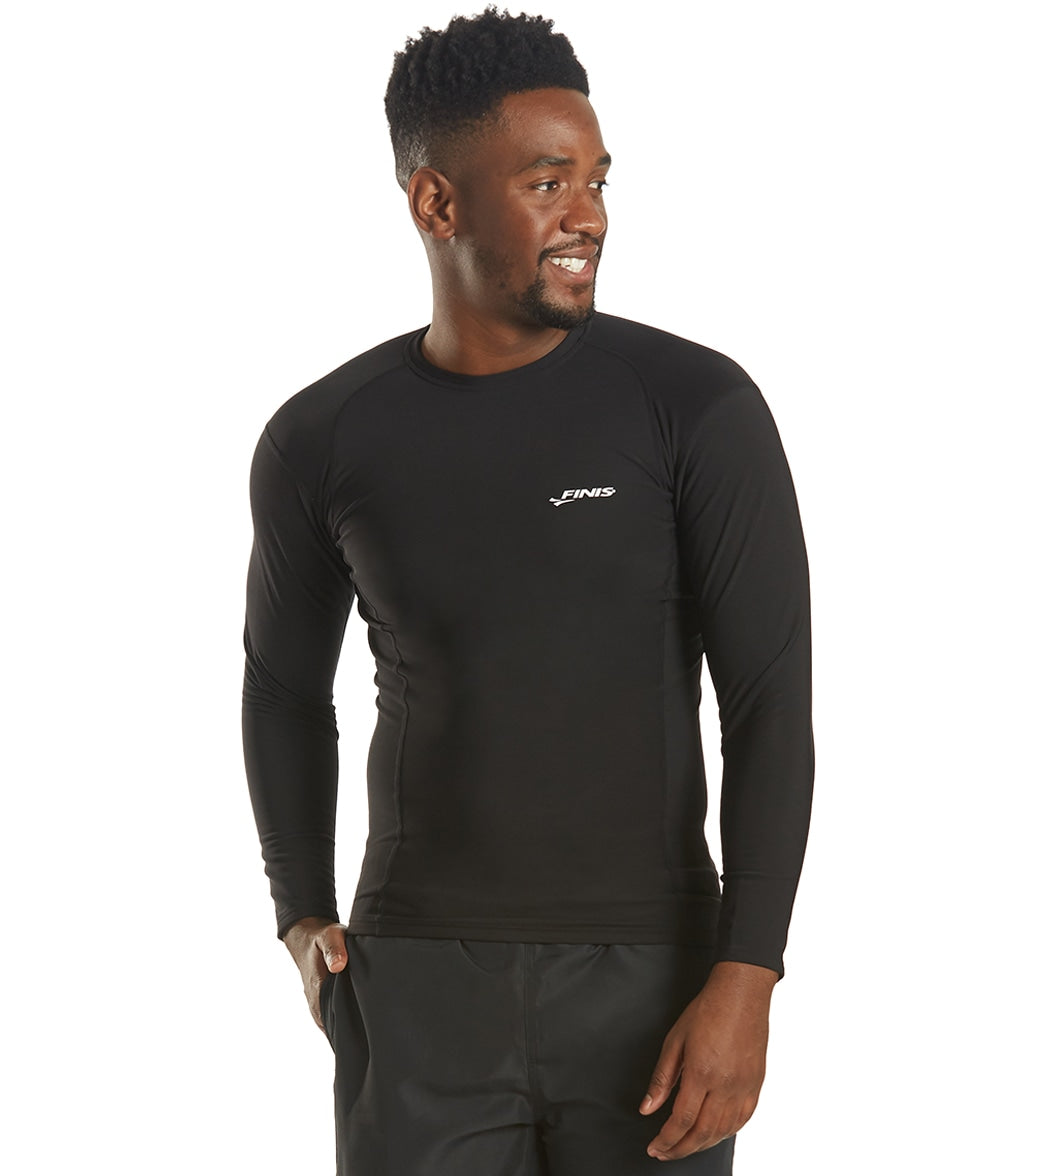 FINIS Thermal Training Shirt at SwimOutlet.com